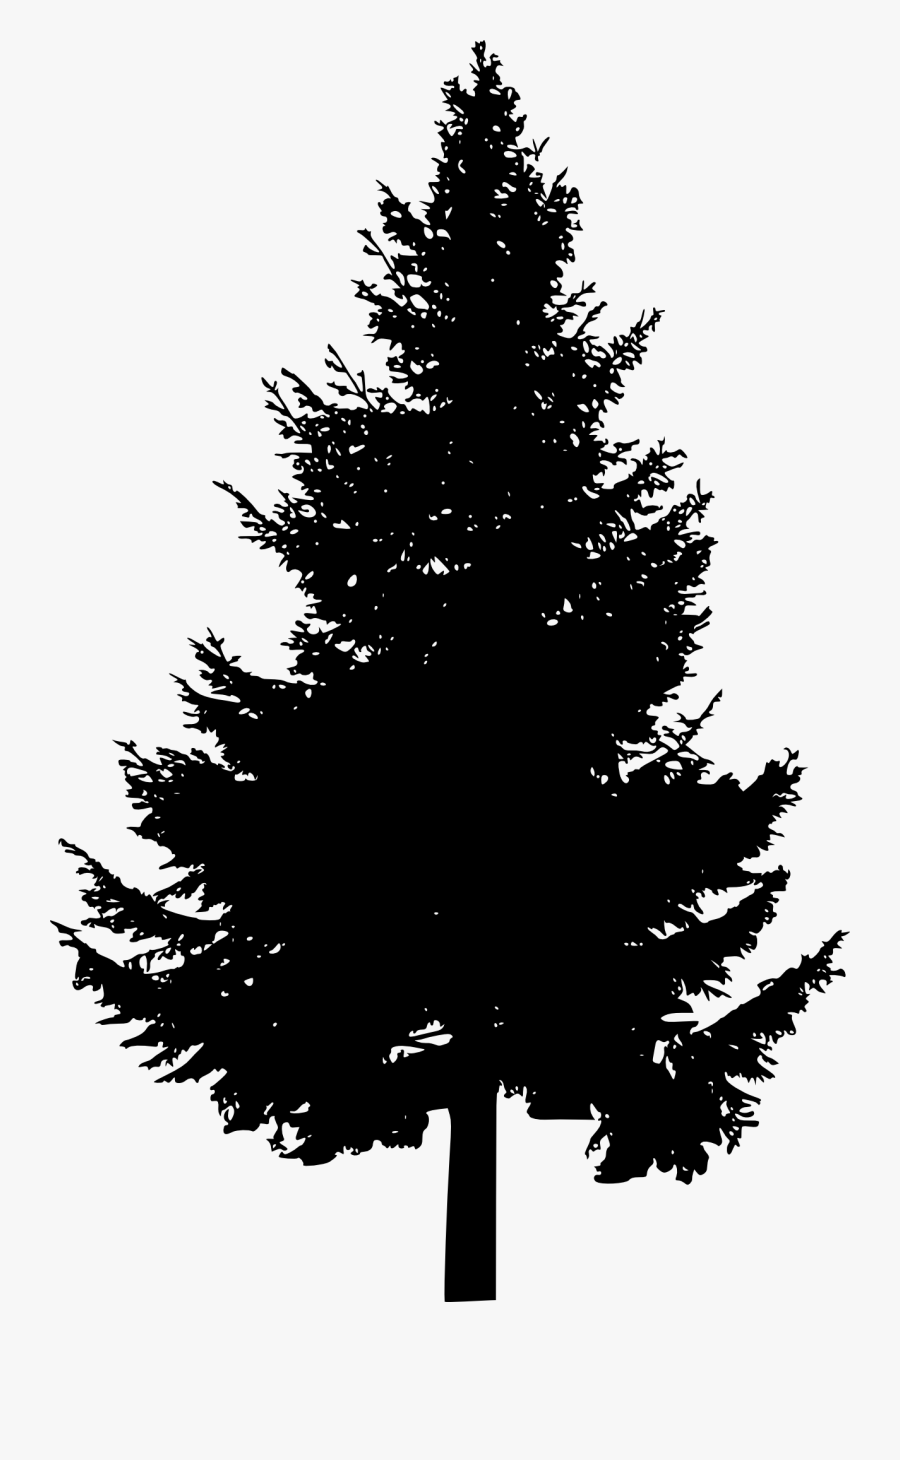 Pine Tree Silhouette Clip Art - Pine Trees Silhouette Png, Transparent Clipart